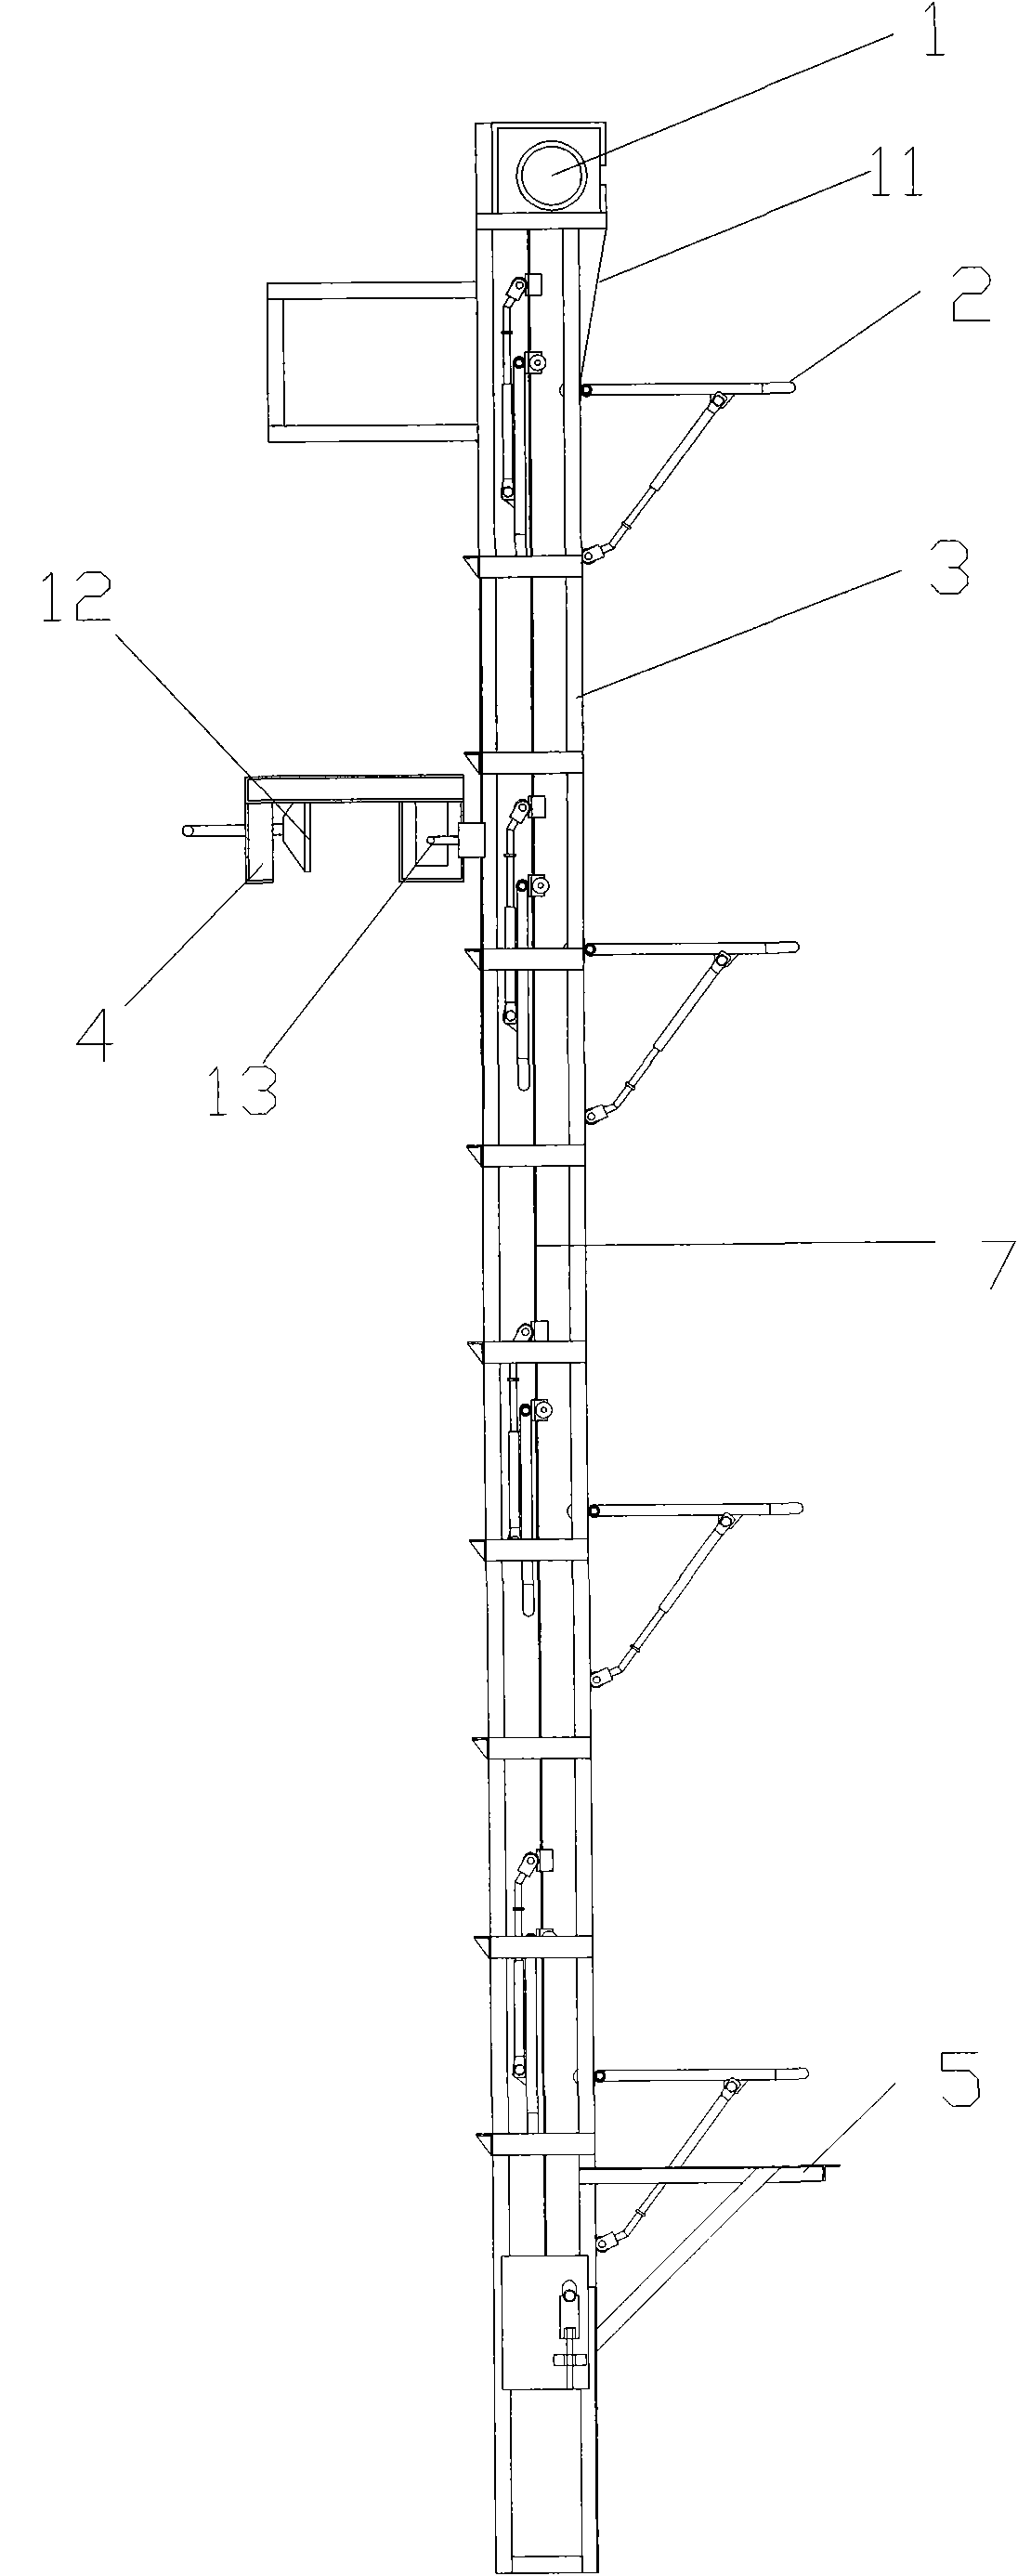 Semi-automatic bottom sowing device